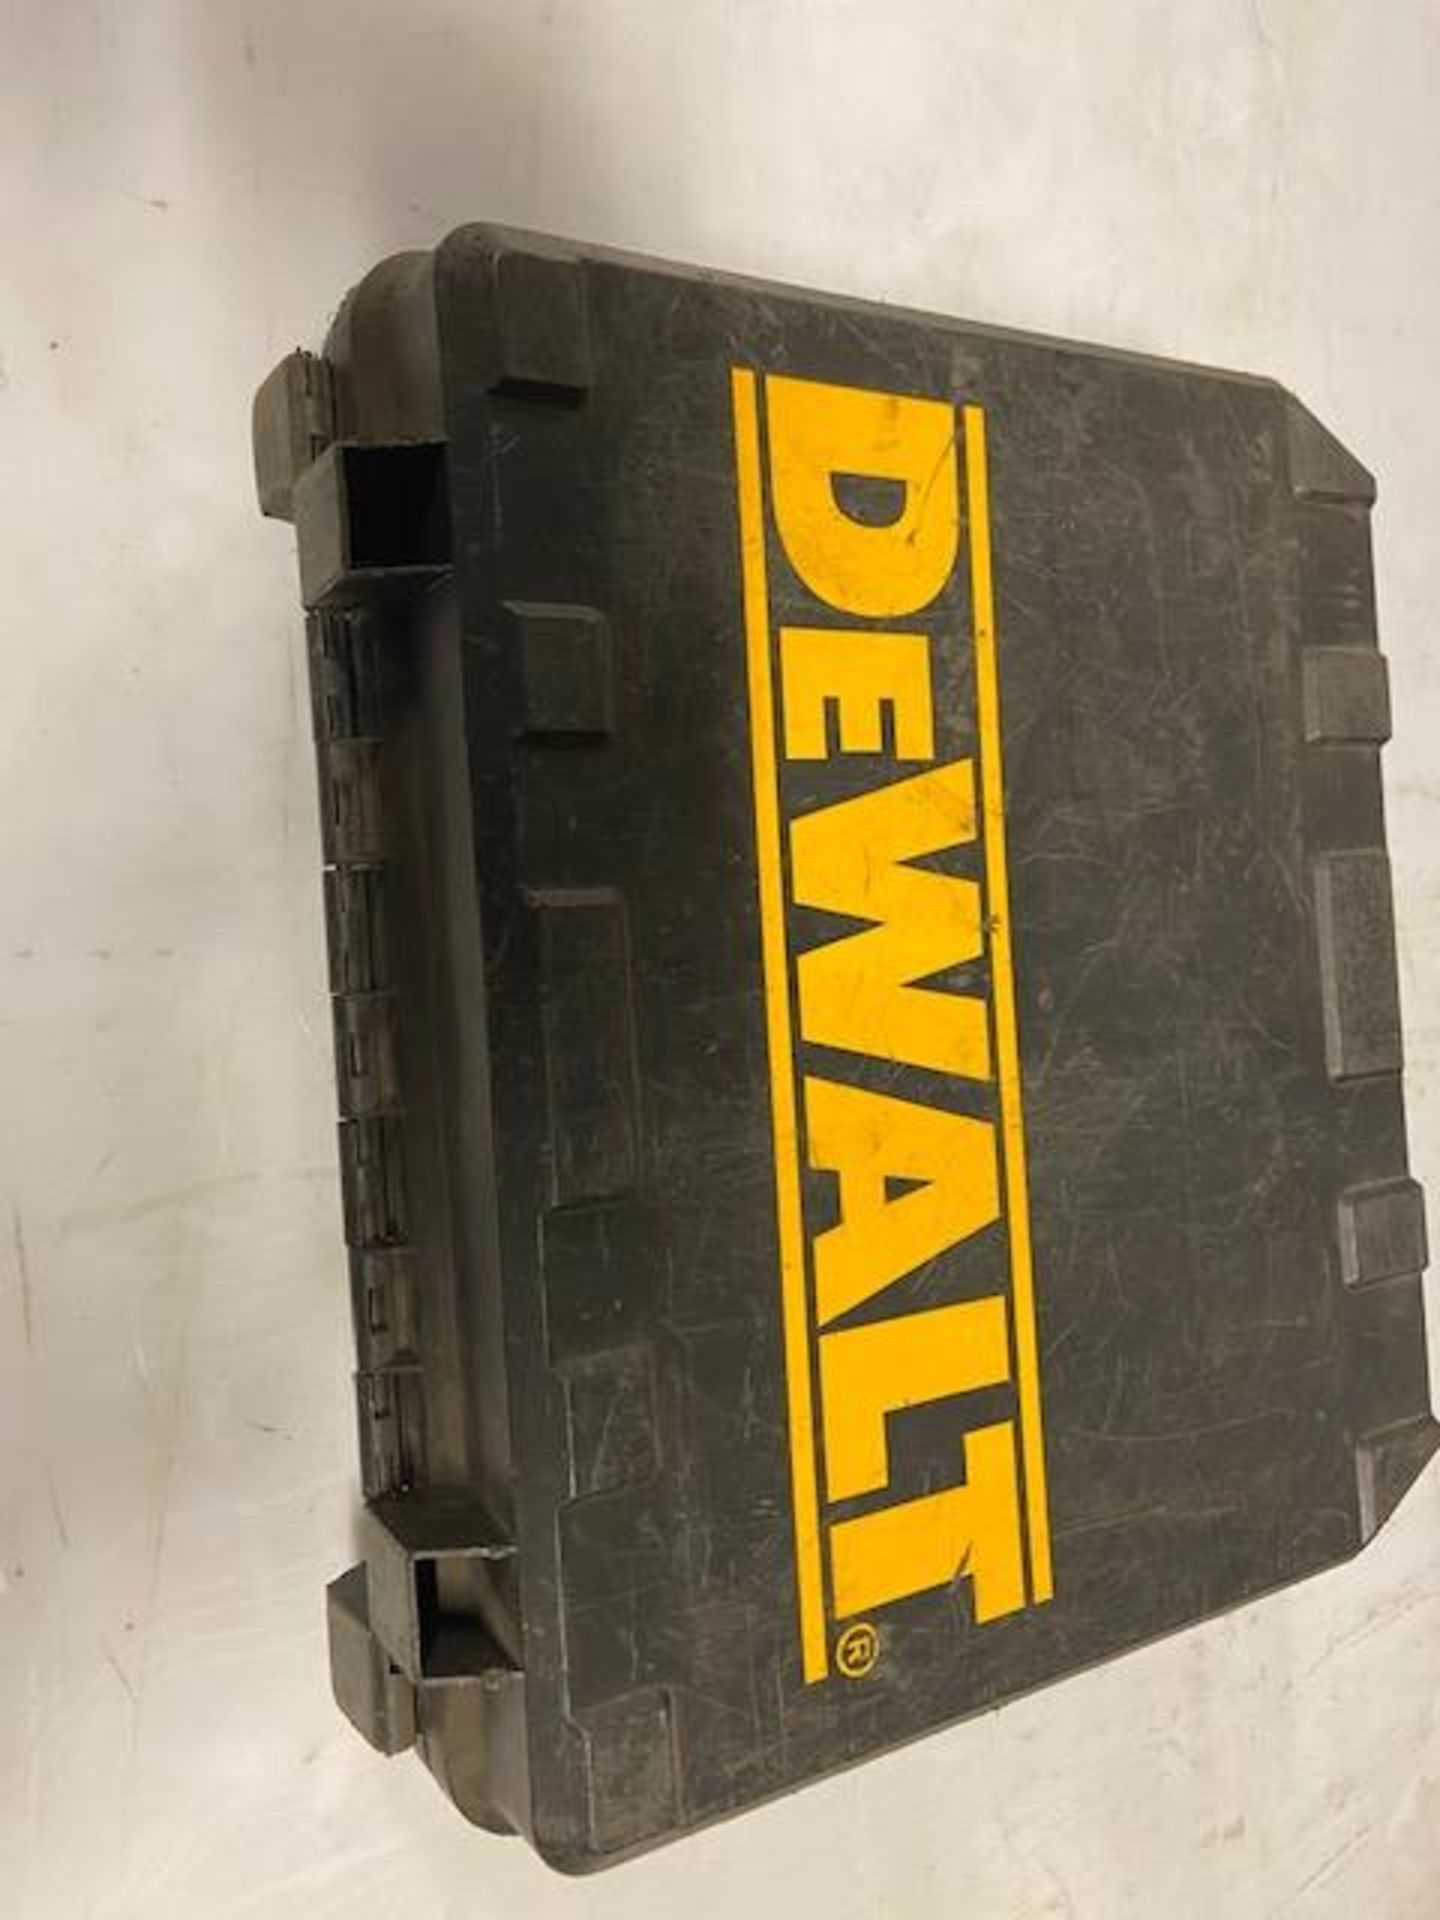 Dewalt Battery Powered Drill in case - Image 2 of 2